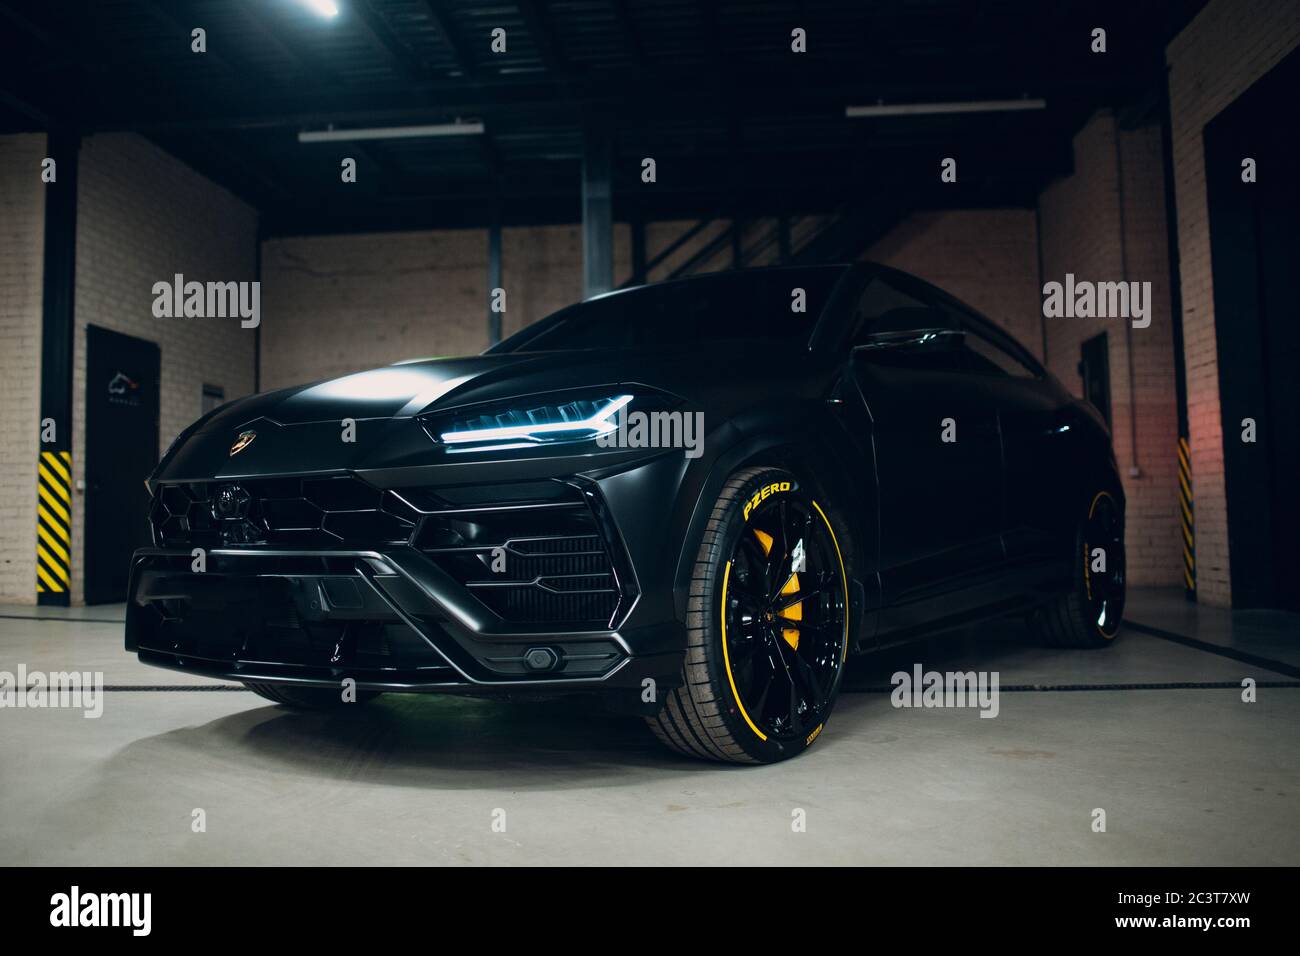 Page 4 Black Lamborghini High Resolution Stock Photography And Images Alamy